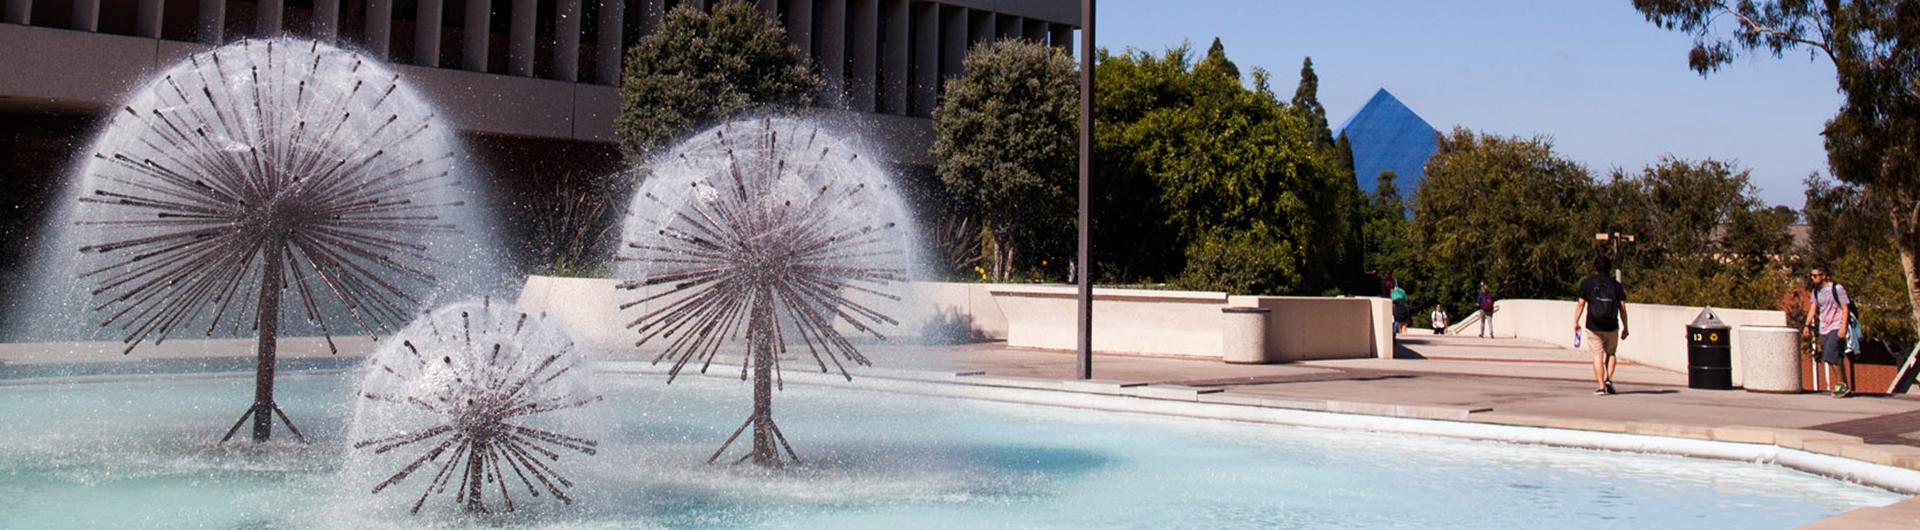 Fountain by Brolthman Hall